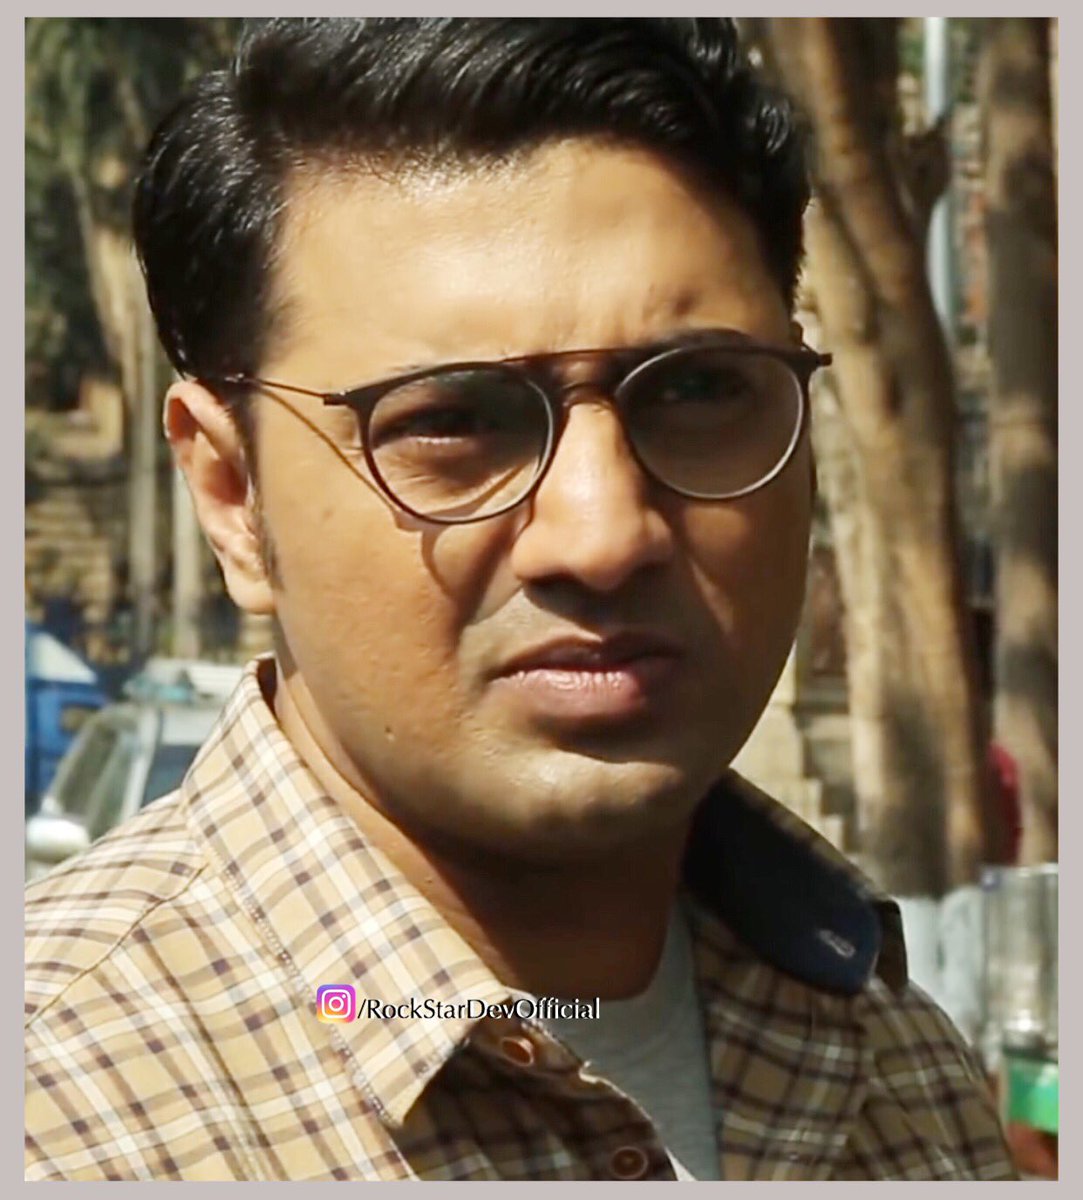 Kill people with your success, and burn people with your humble smile😊😊😎 #KABIR #KabirSpreadsHumanity #PeaceHasAPrice @idevadhikari